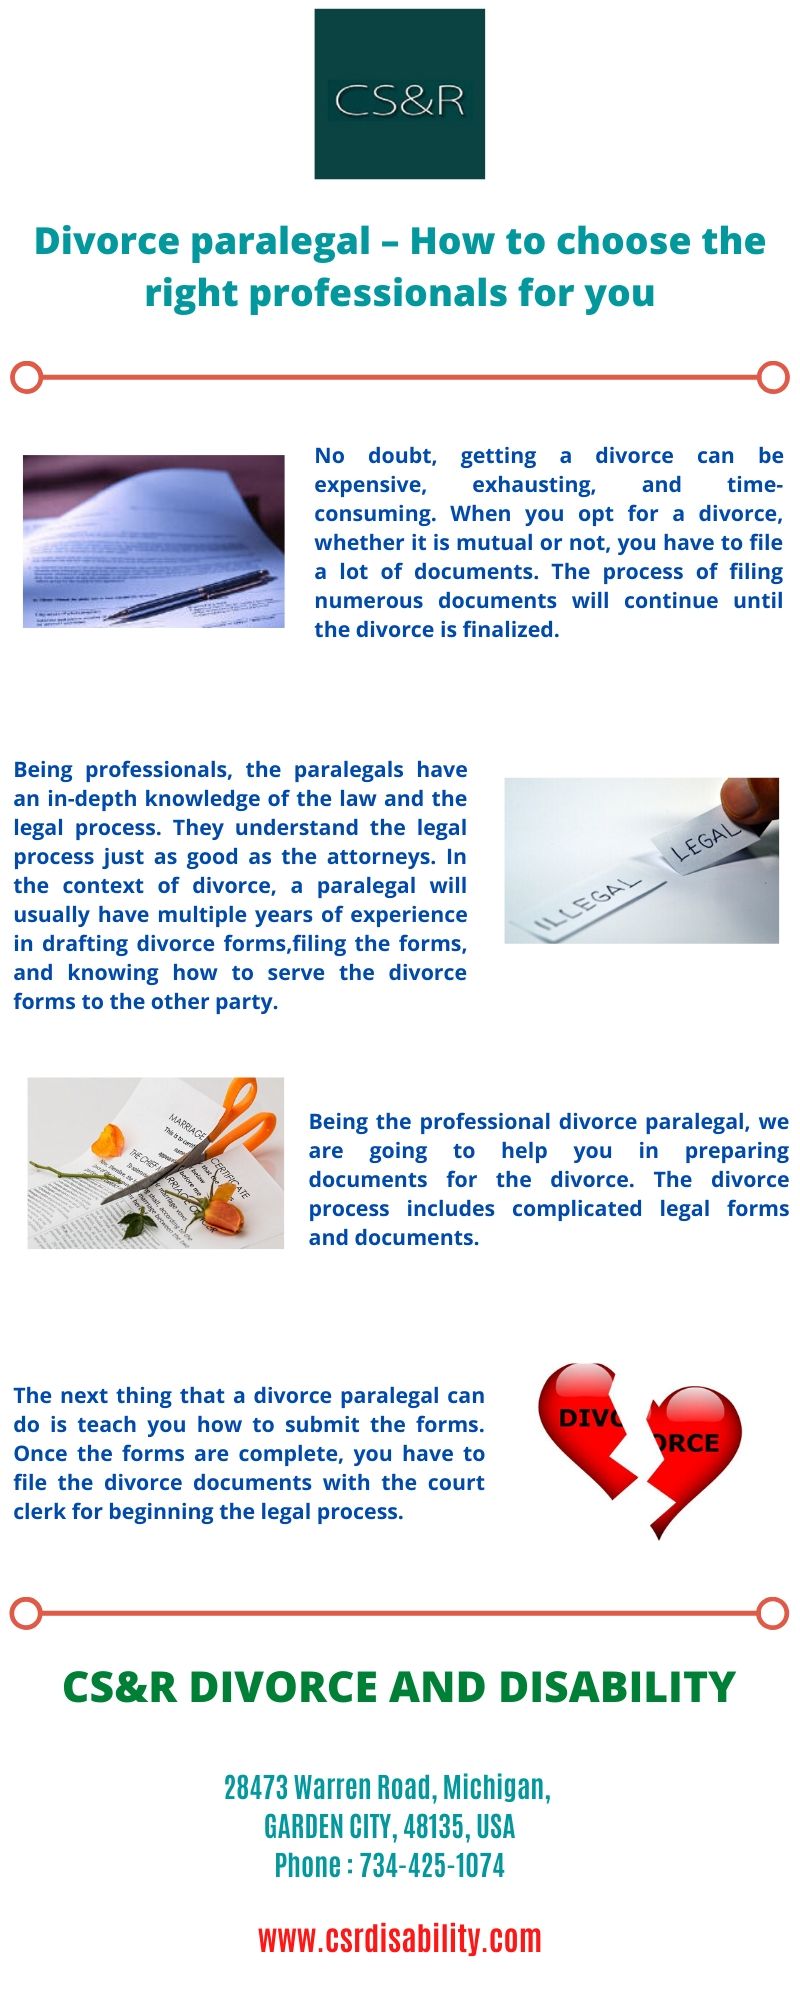 Divorce paralegal – How to choose the right professionals for you Being the professional divorce paralegal, we are going to help you in preparing documents for the divorce. The divorce process includes complicated legal forms and documents. For more details, visit this link: https://www.csrdisability.com/
 by csrdisability